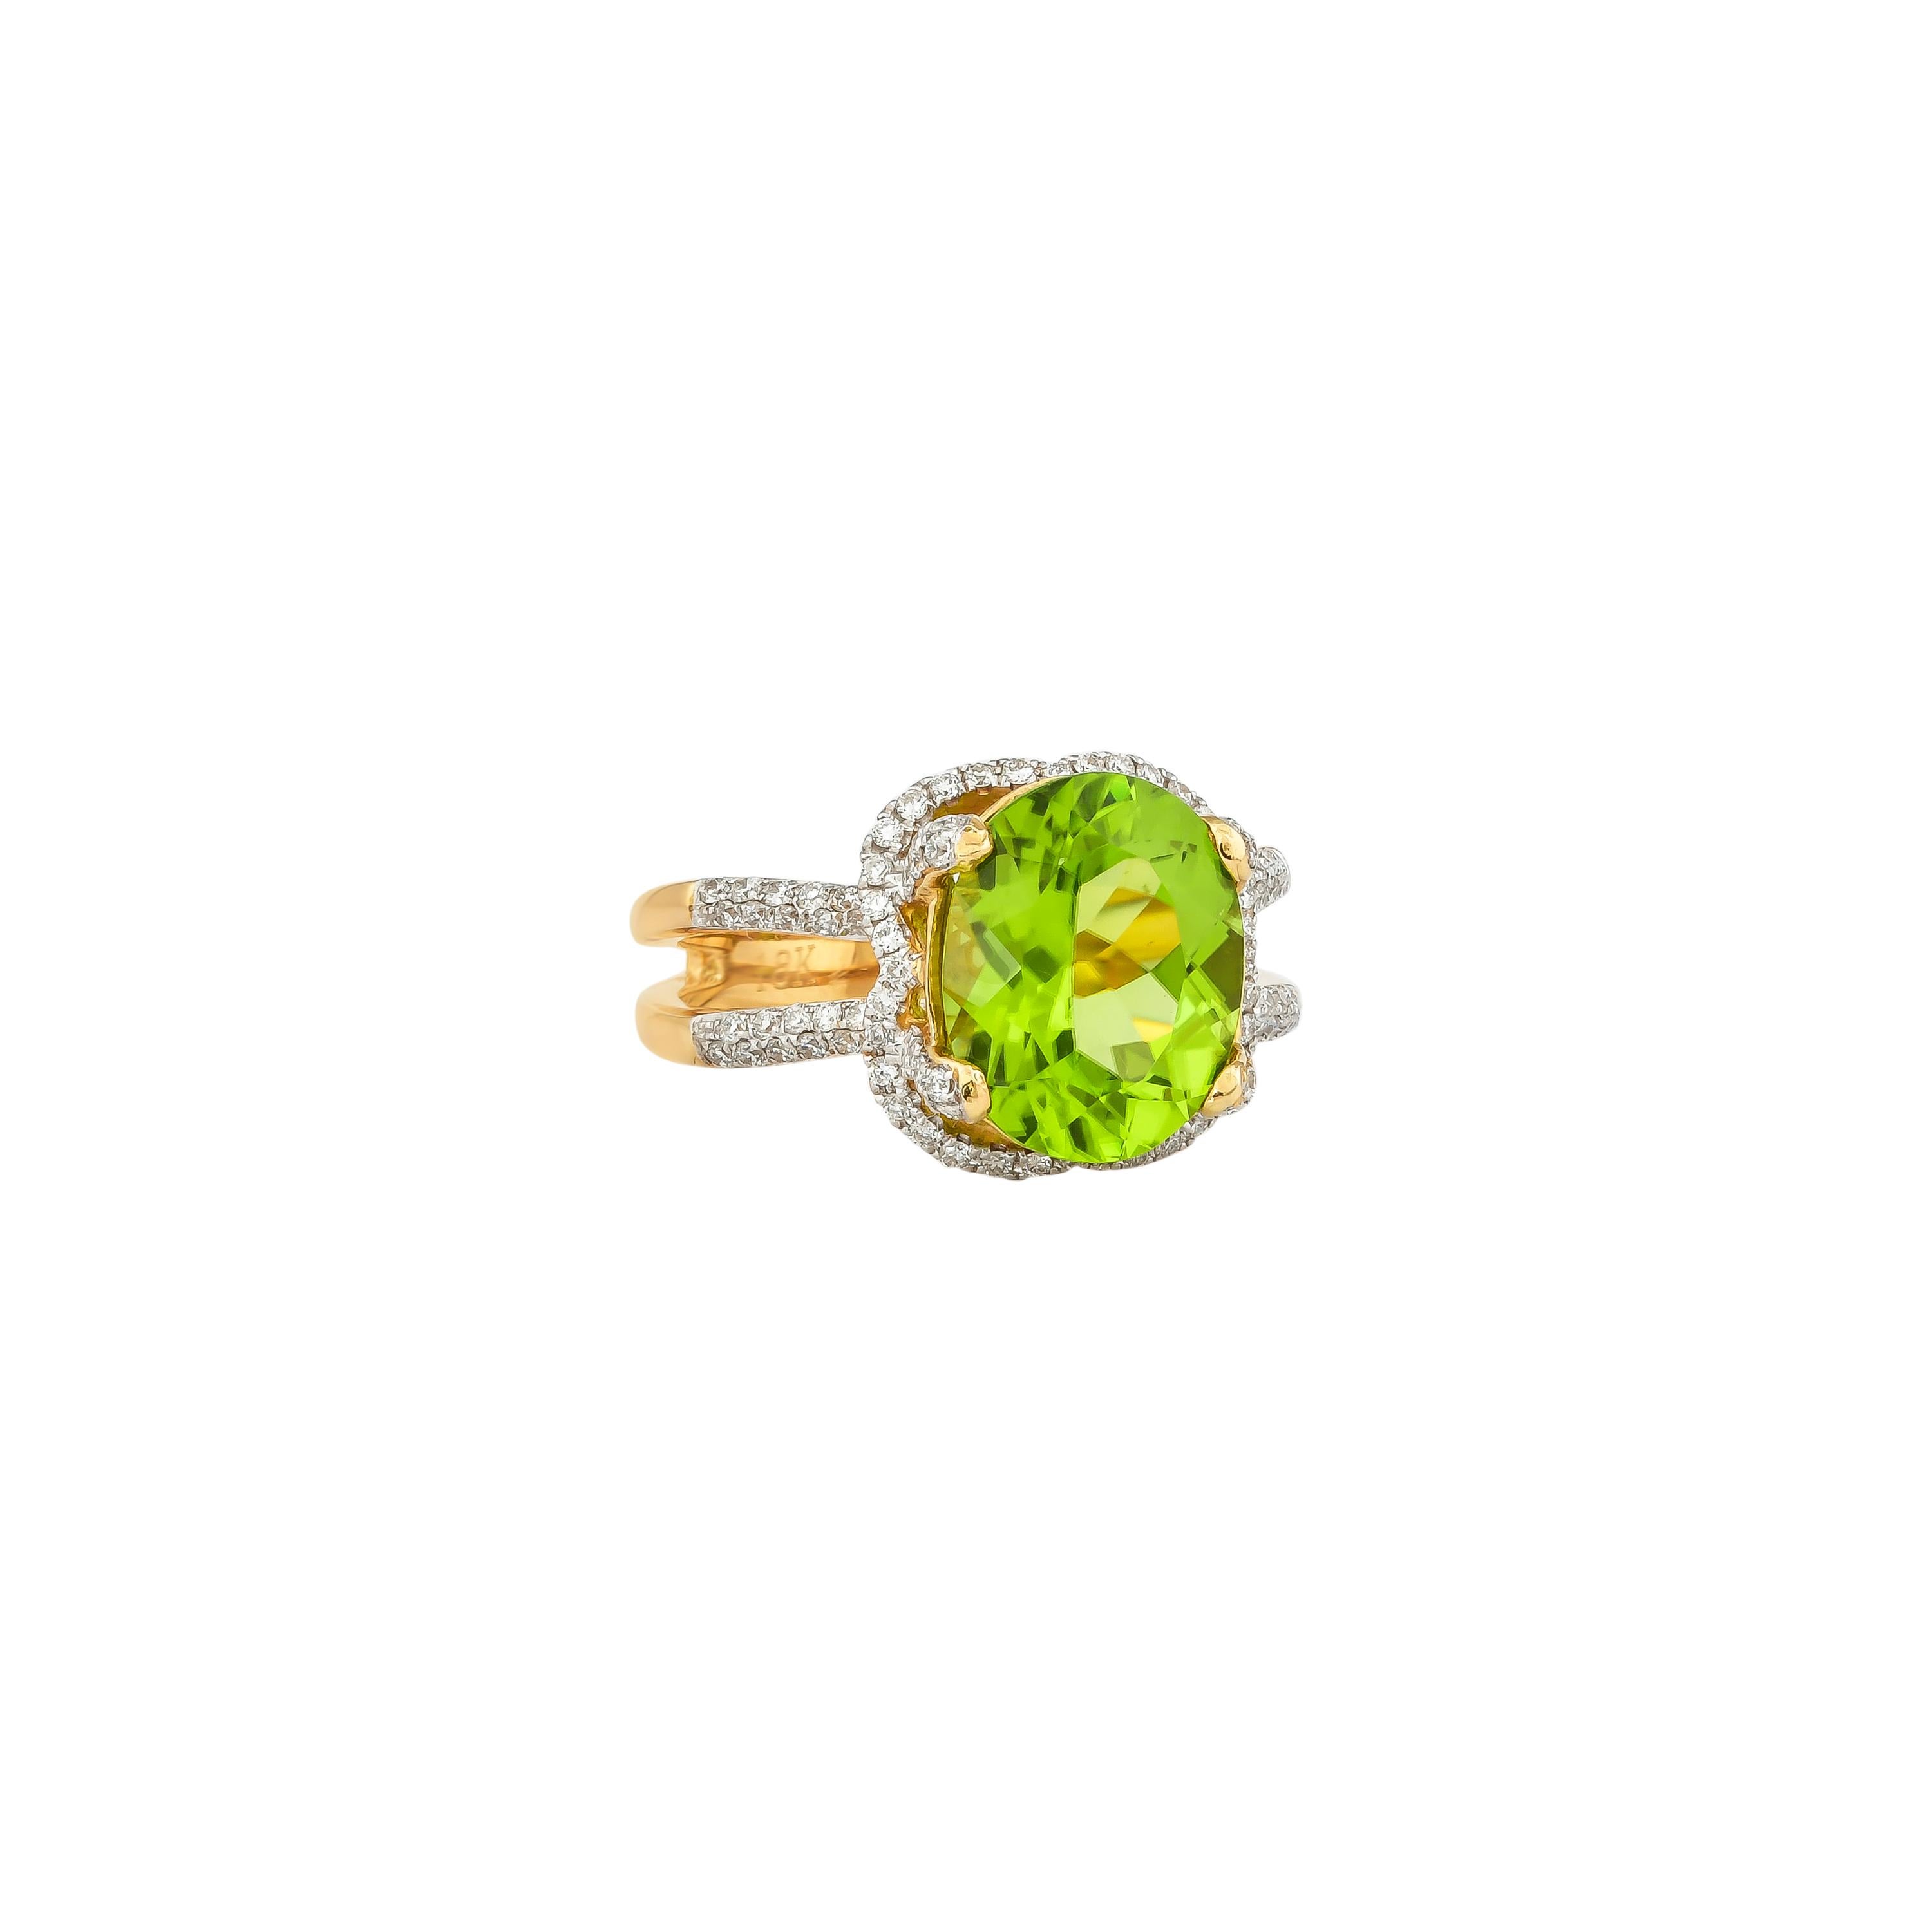 This collection features an array of pretty peridot rings! Accented with diamonds these rings are made in yellow gold and present a vibrant and fresh look. 

Classic peridot ring in 18K yellow gold with diamonds. 

Peridot: 4.5 carat oval